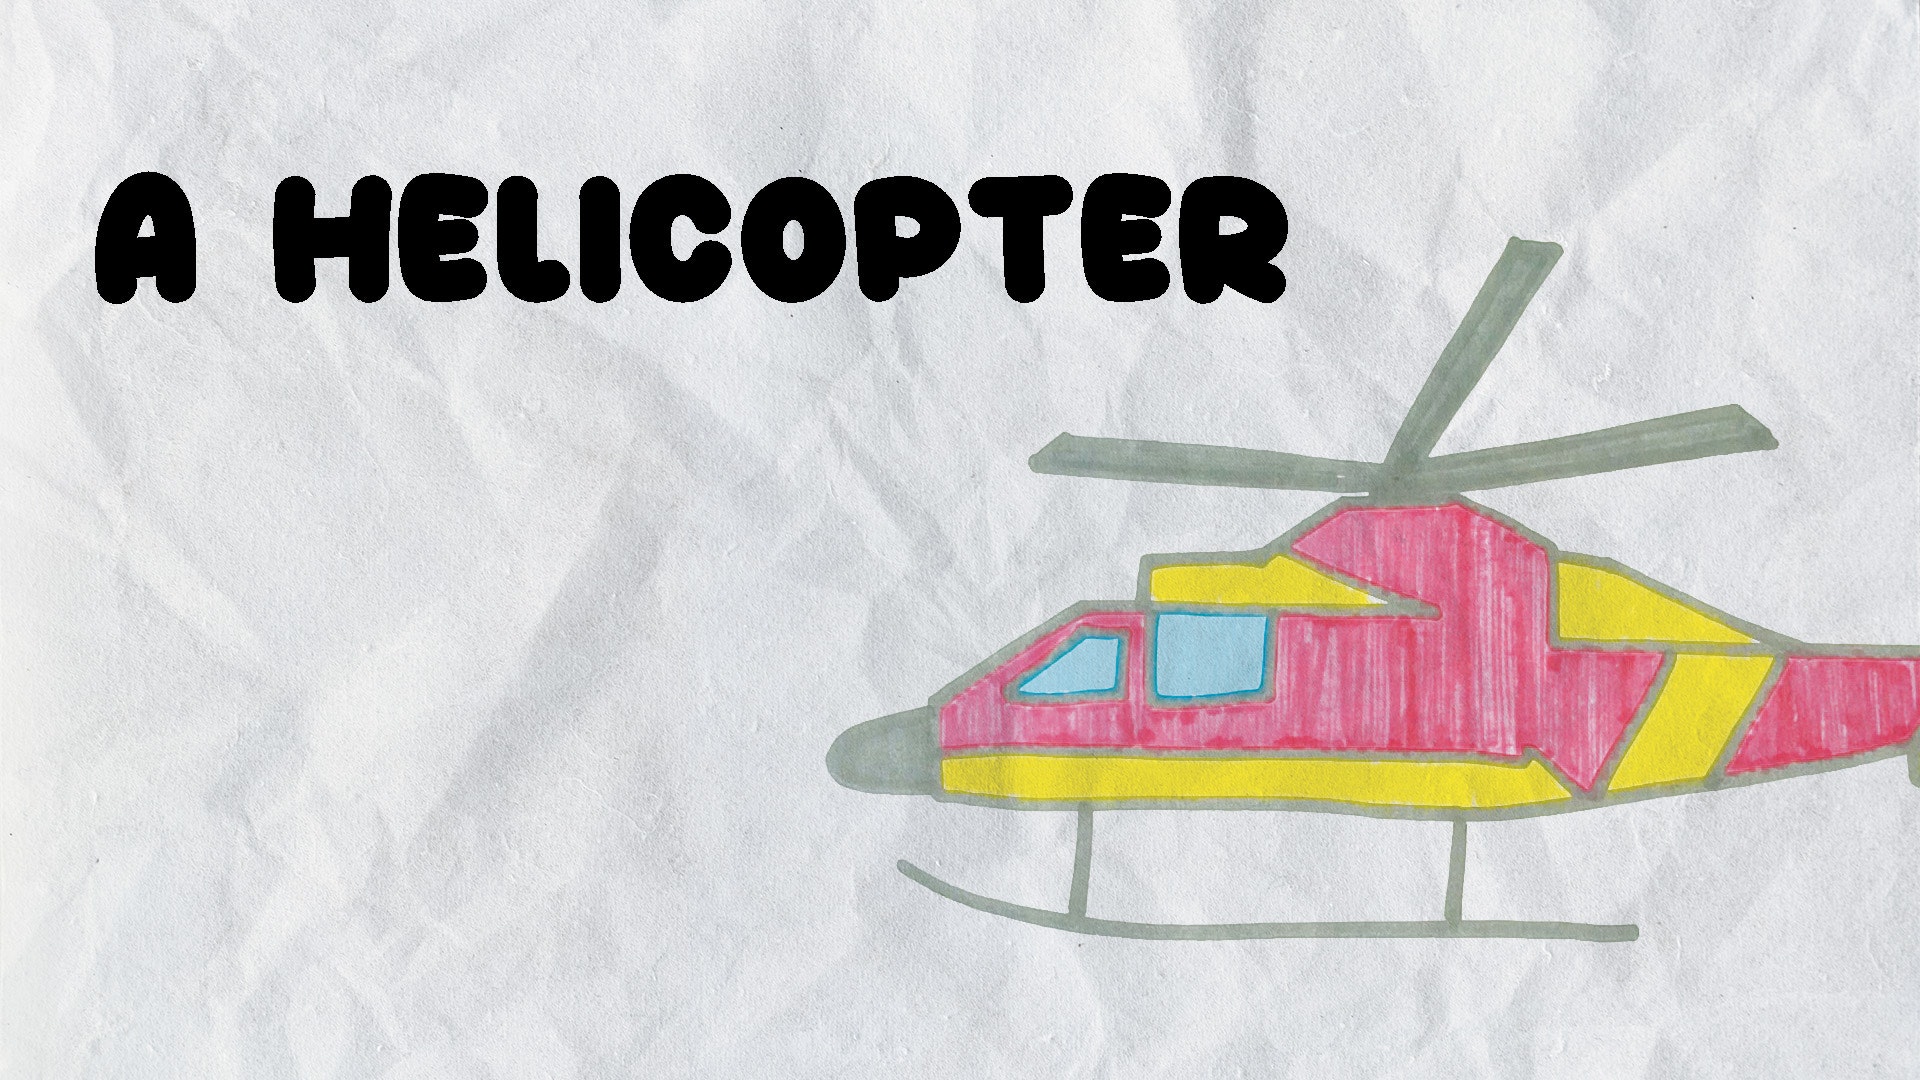 How to Draw an helicopter Easy with Coloring | Art for kids #kidsdrawing  #learntodraw #easydrawings - YouTube